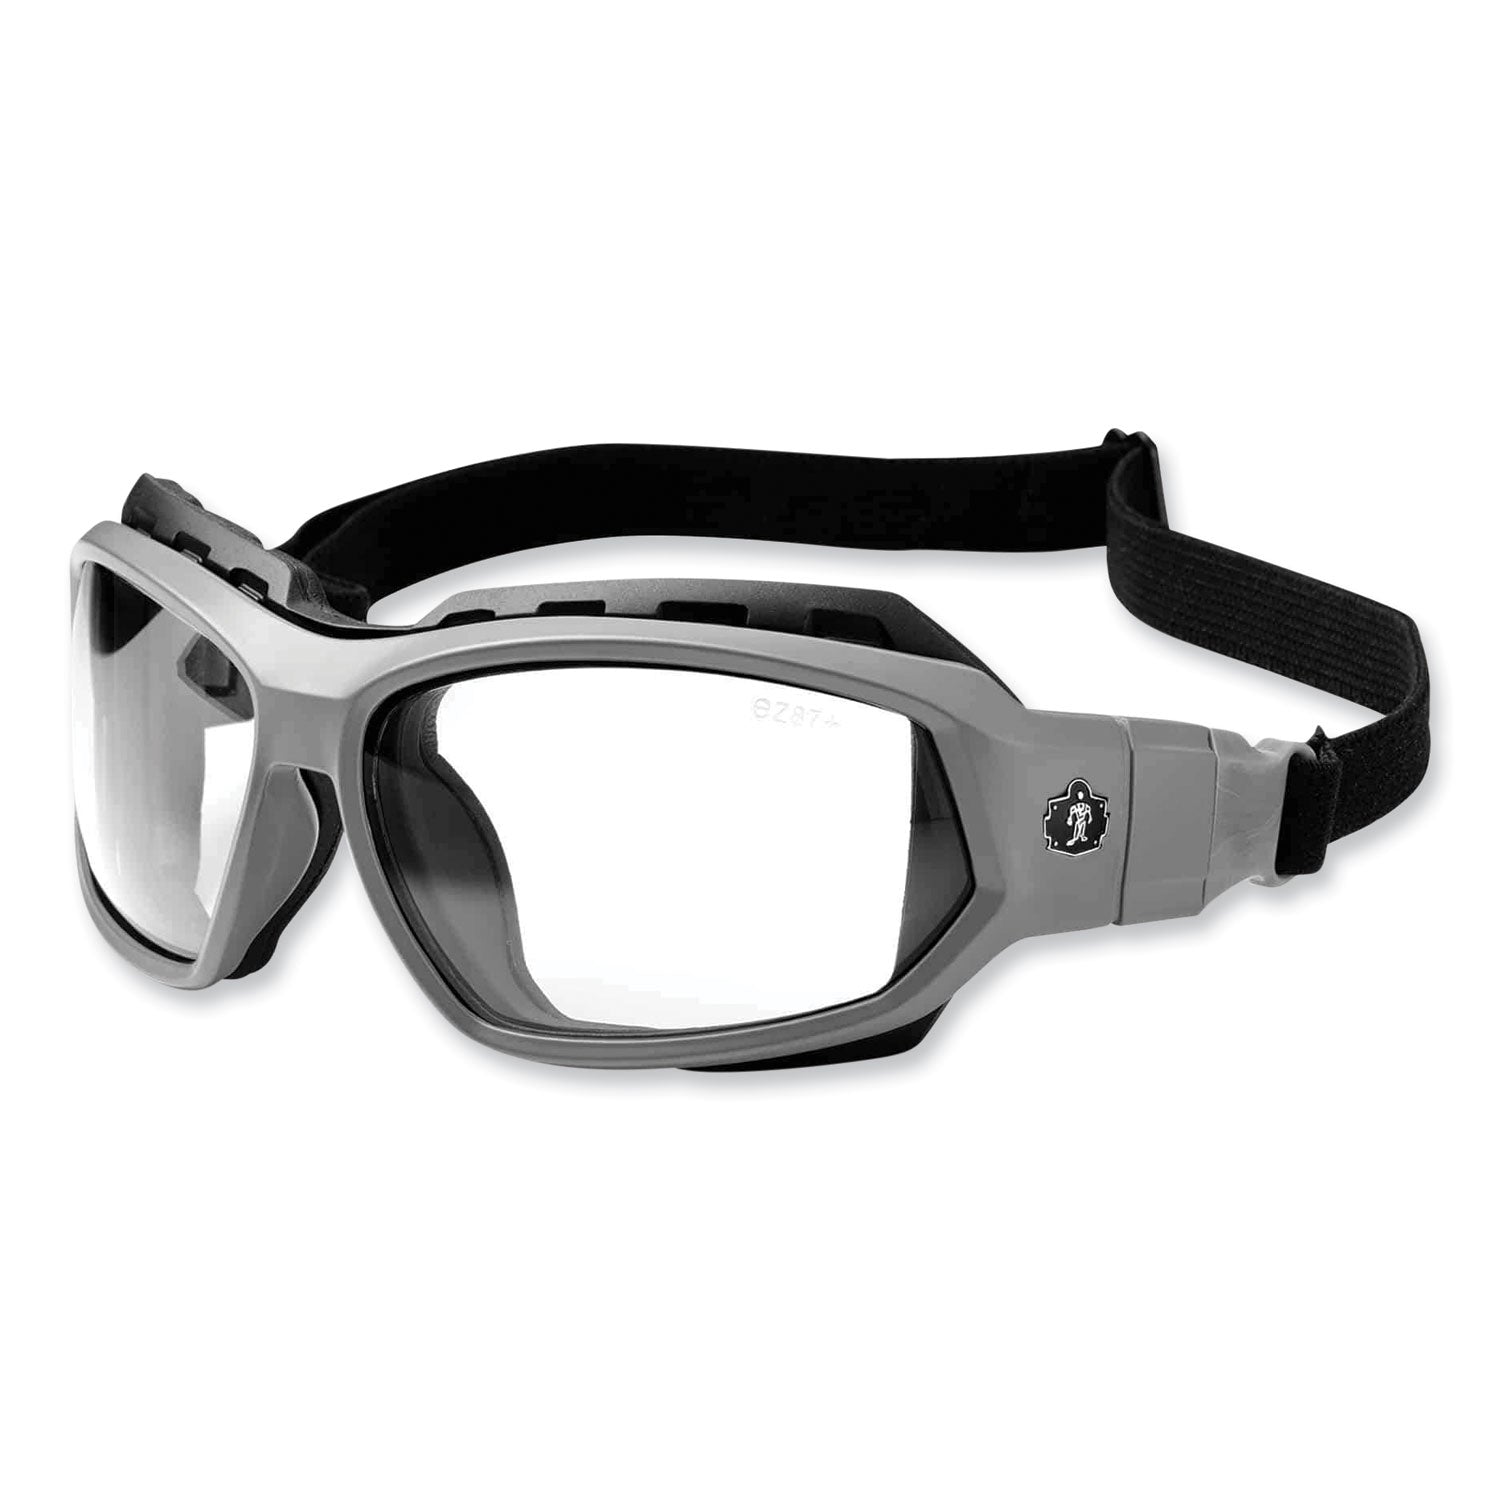 skullerz-loki-safety-glasses-goggles-matte-gray-nylon-impact-frame-clear-polycarbonate-lens-ships-in-1-3-business-days_ego56100 - 2